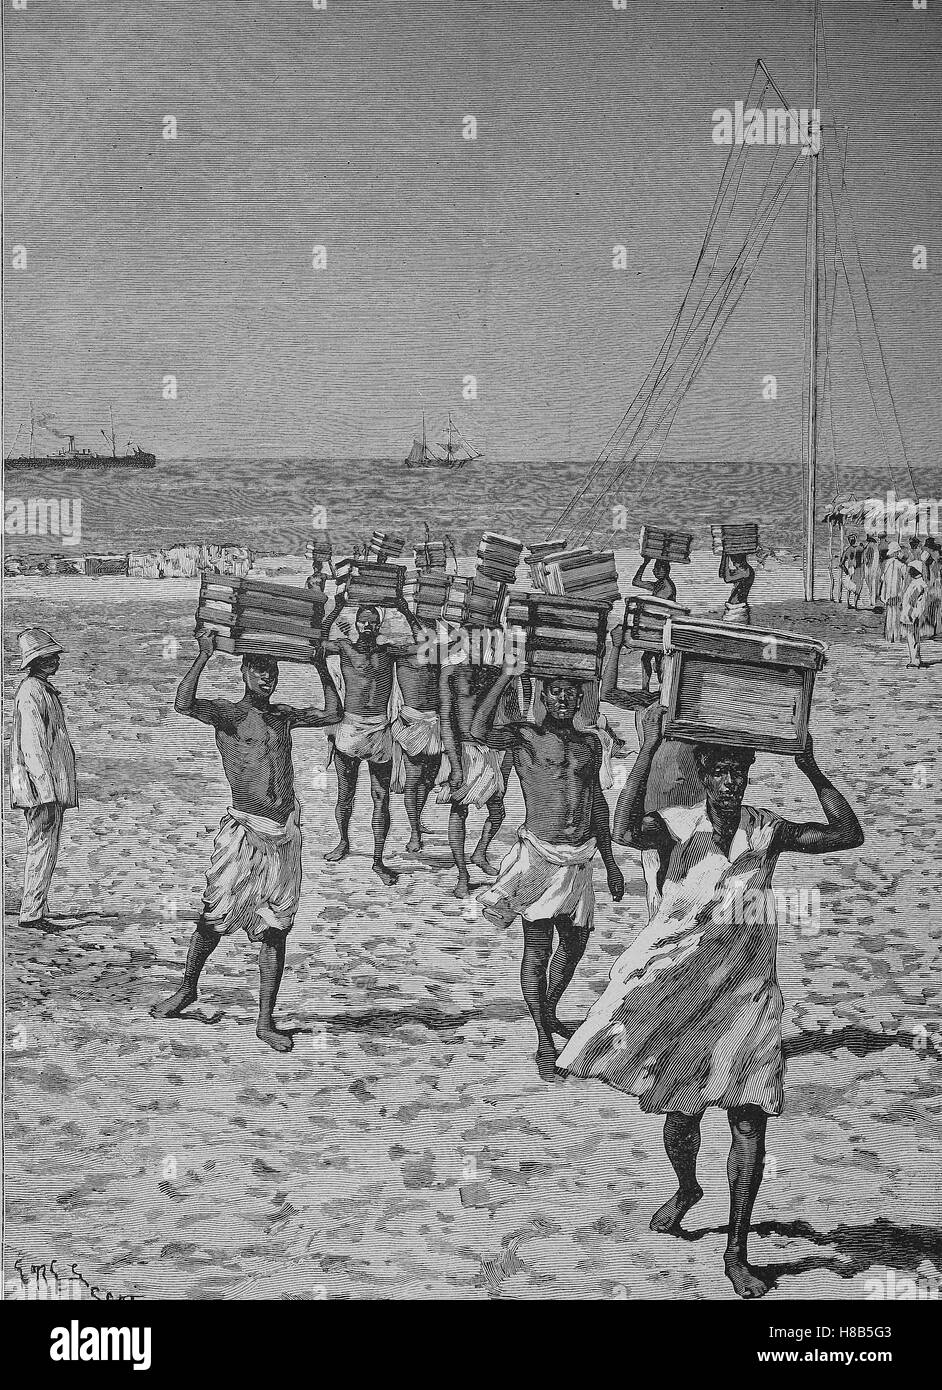 Dahomey, today Benin: discharge of a ship on the beach, Woodcut from 1892 Stock Photo